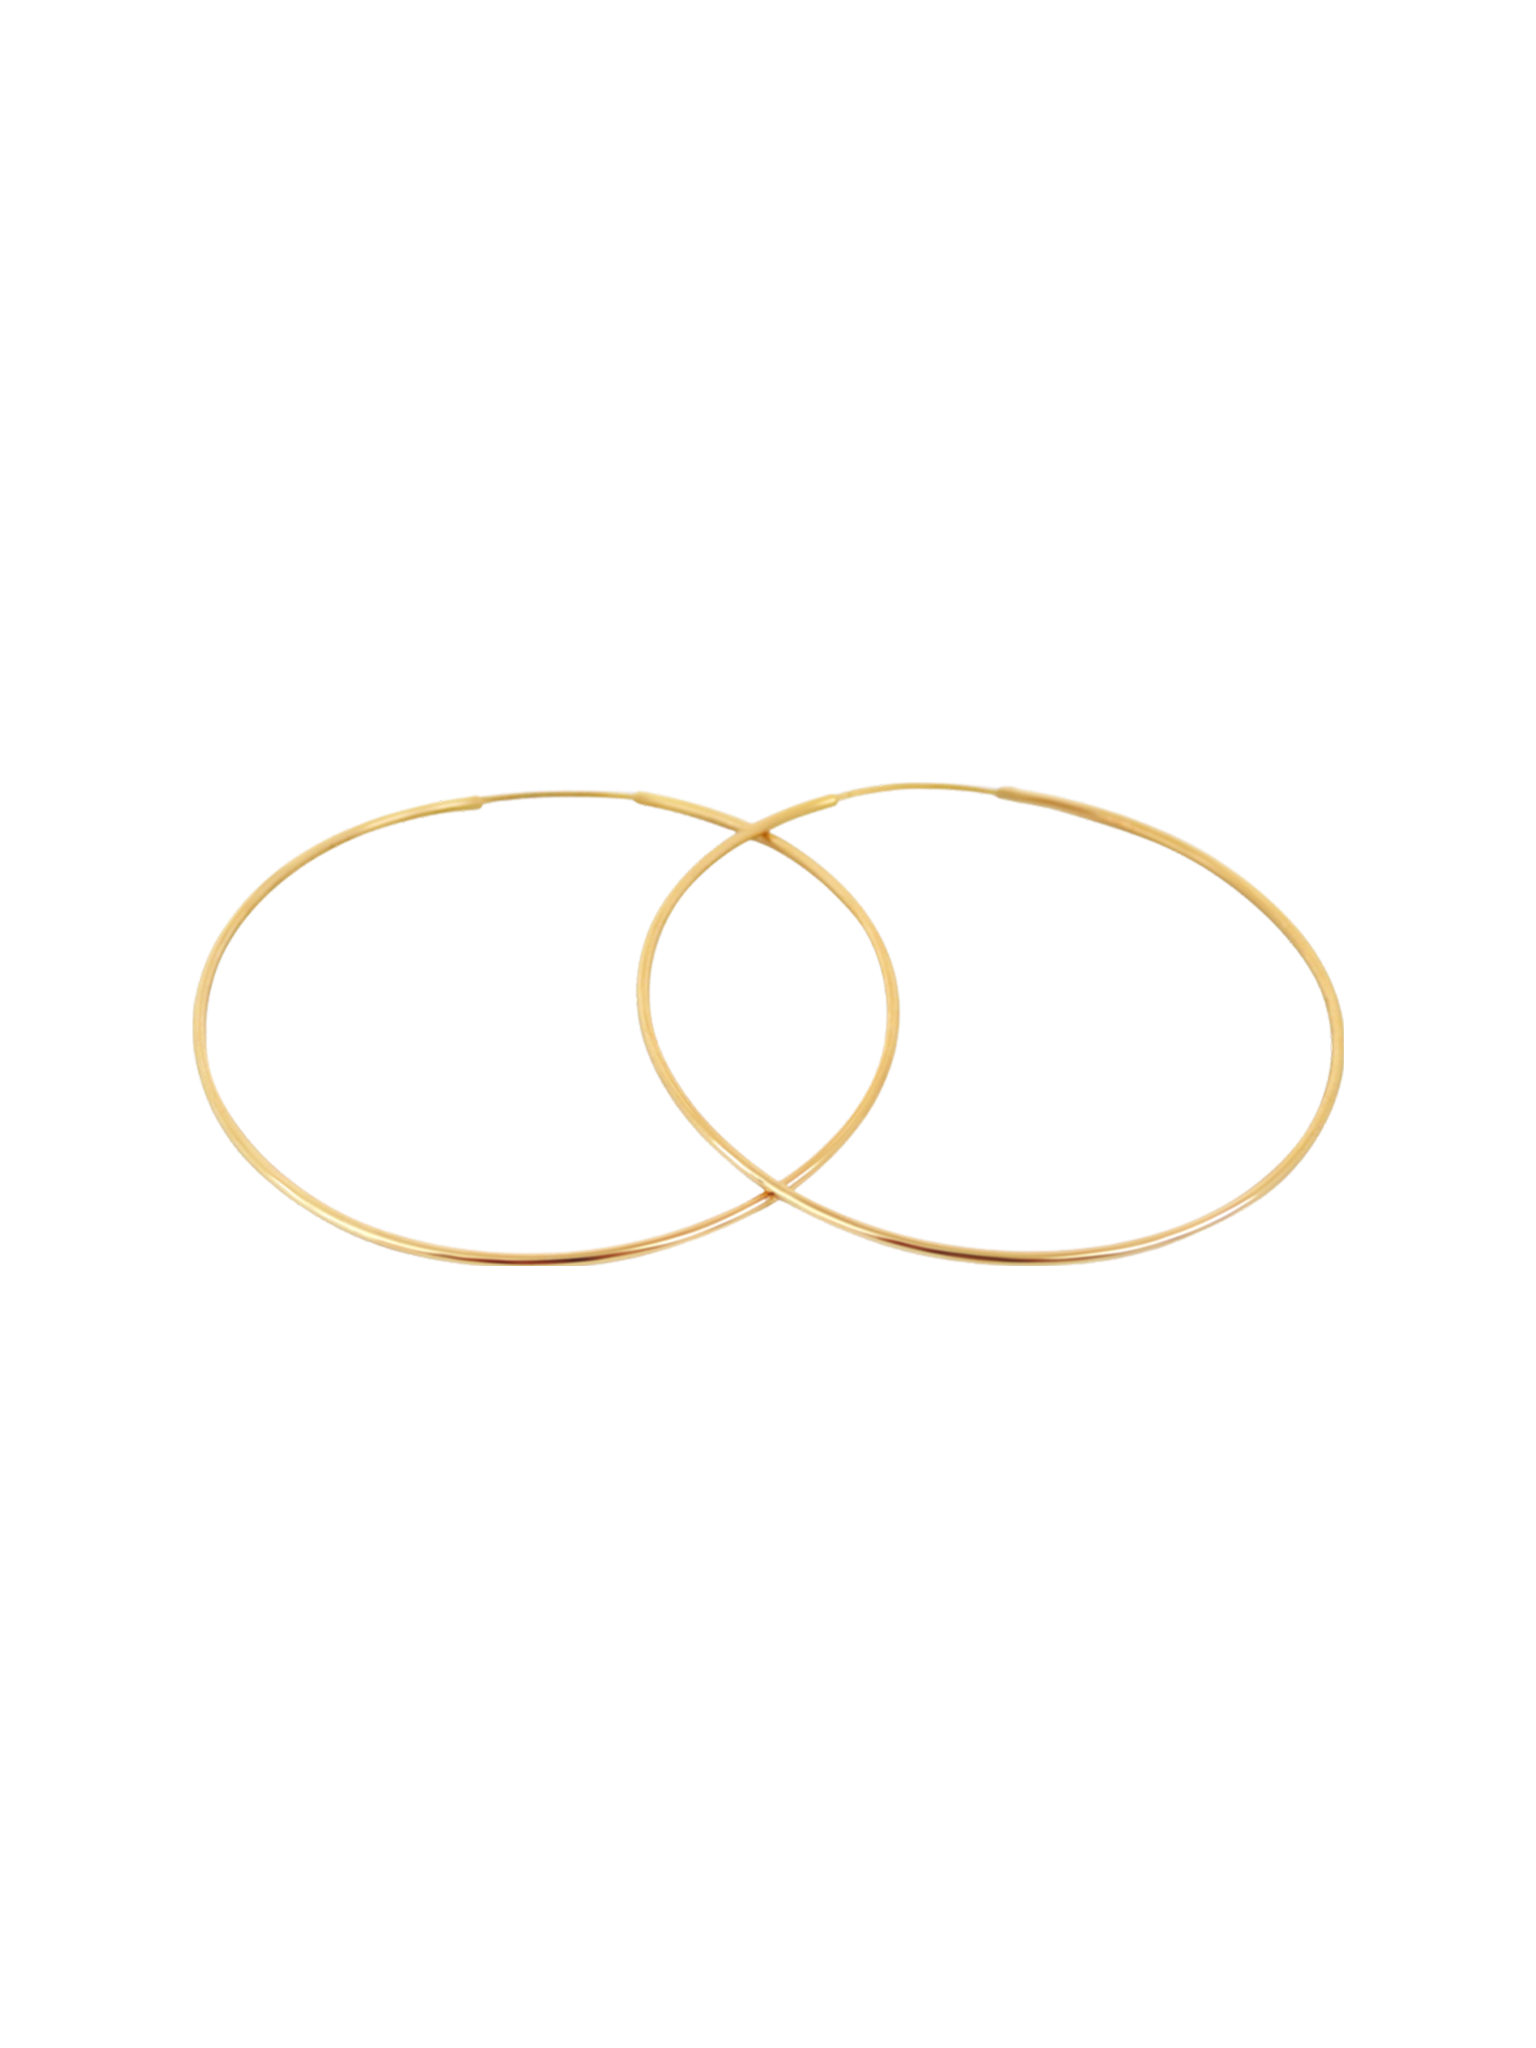 Eco-fine maxi hoops yellow gold